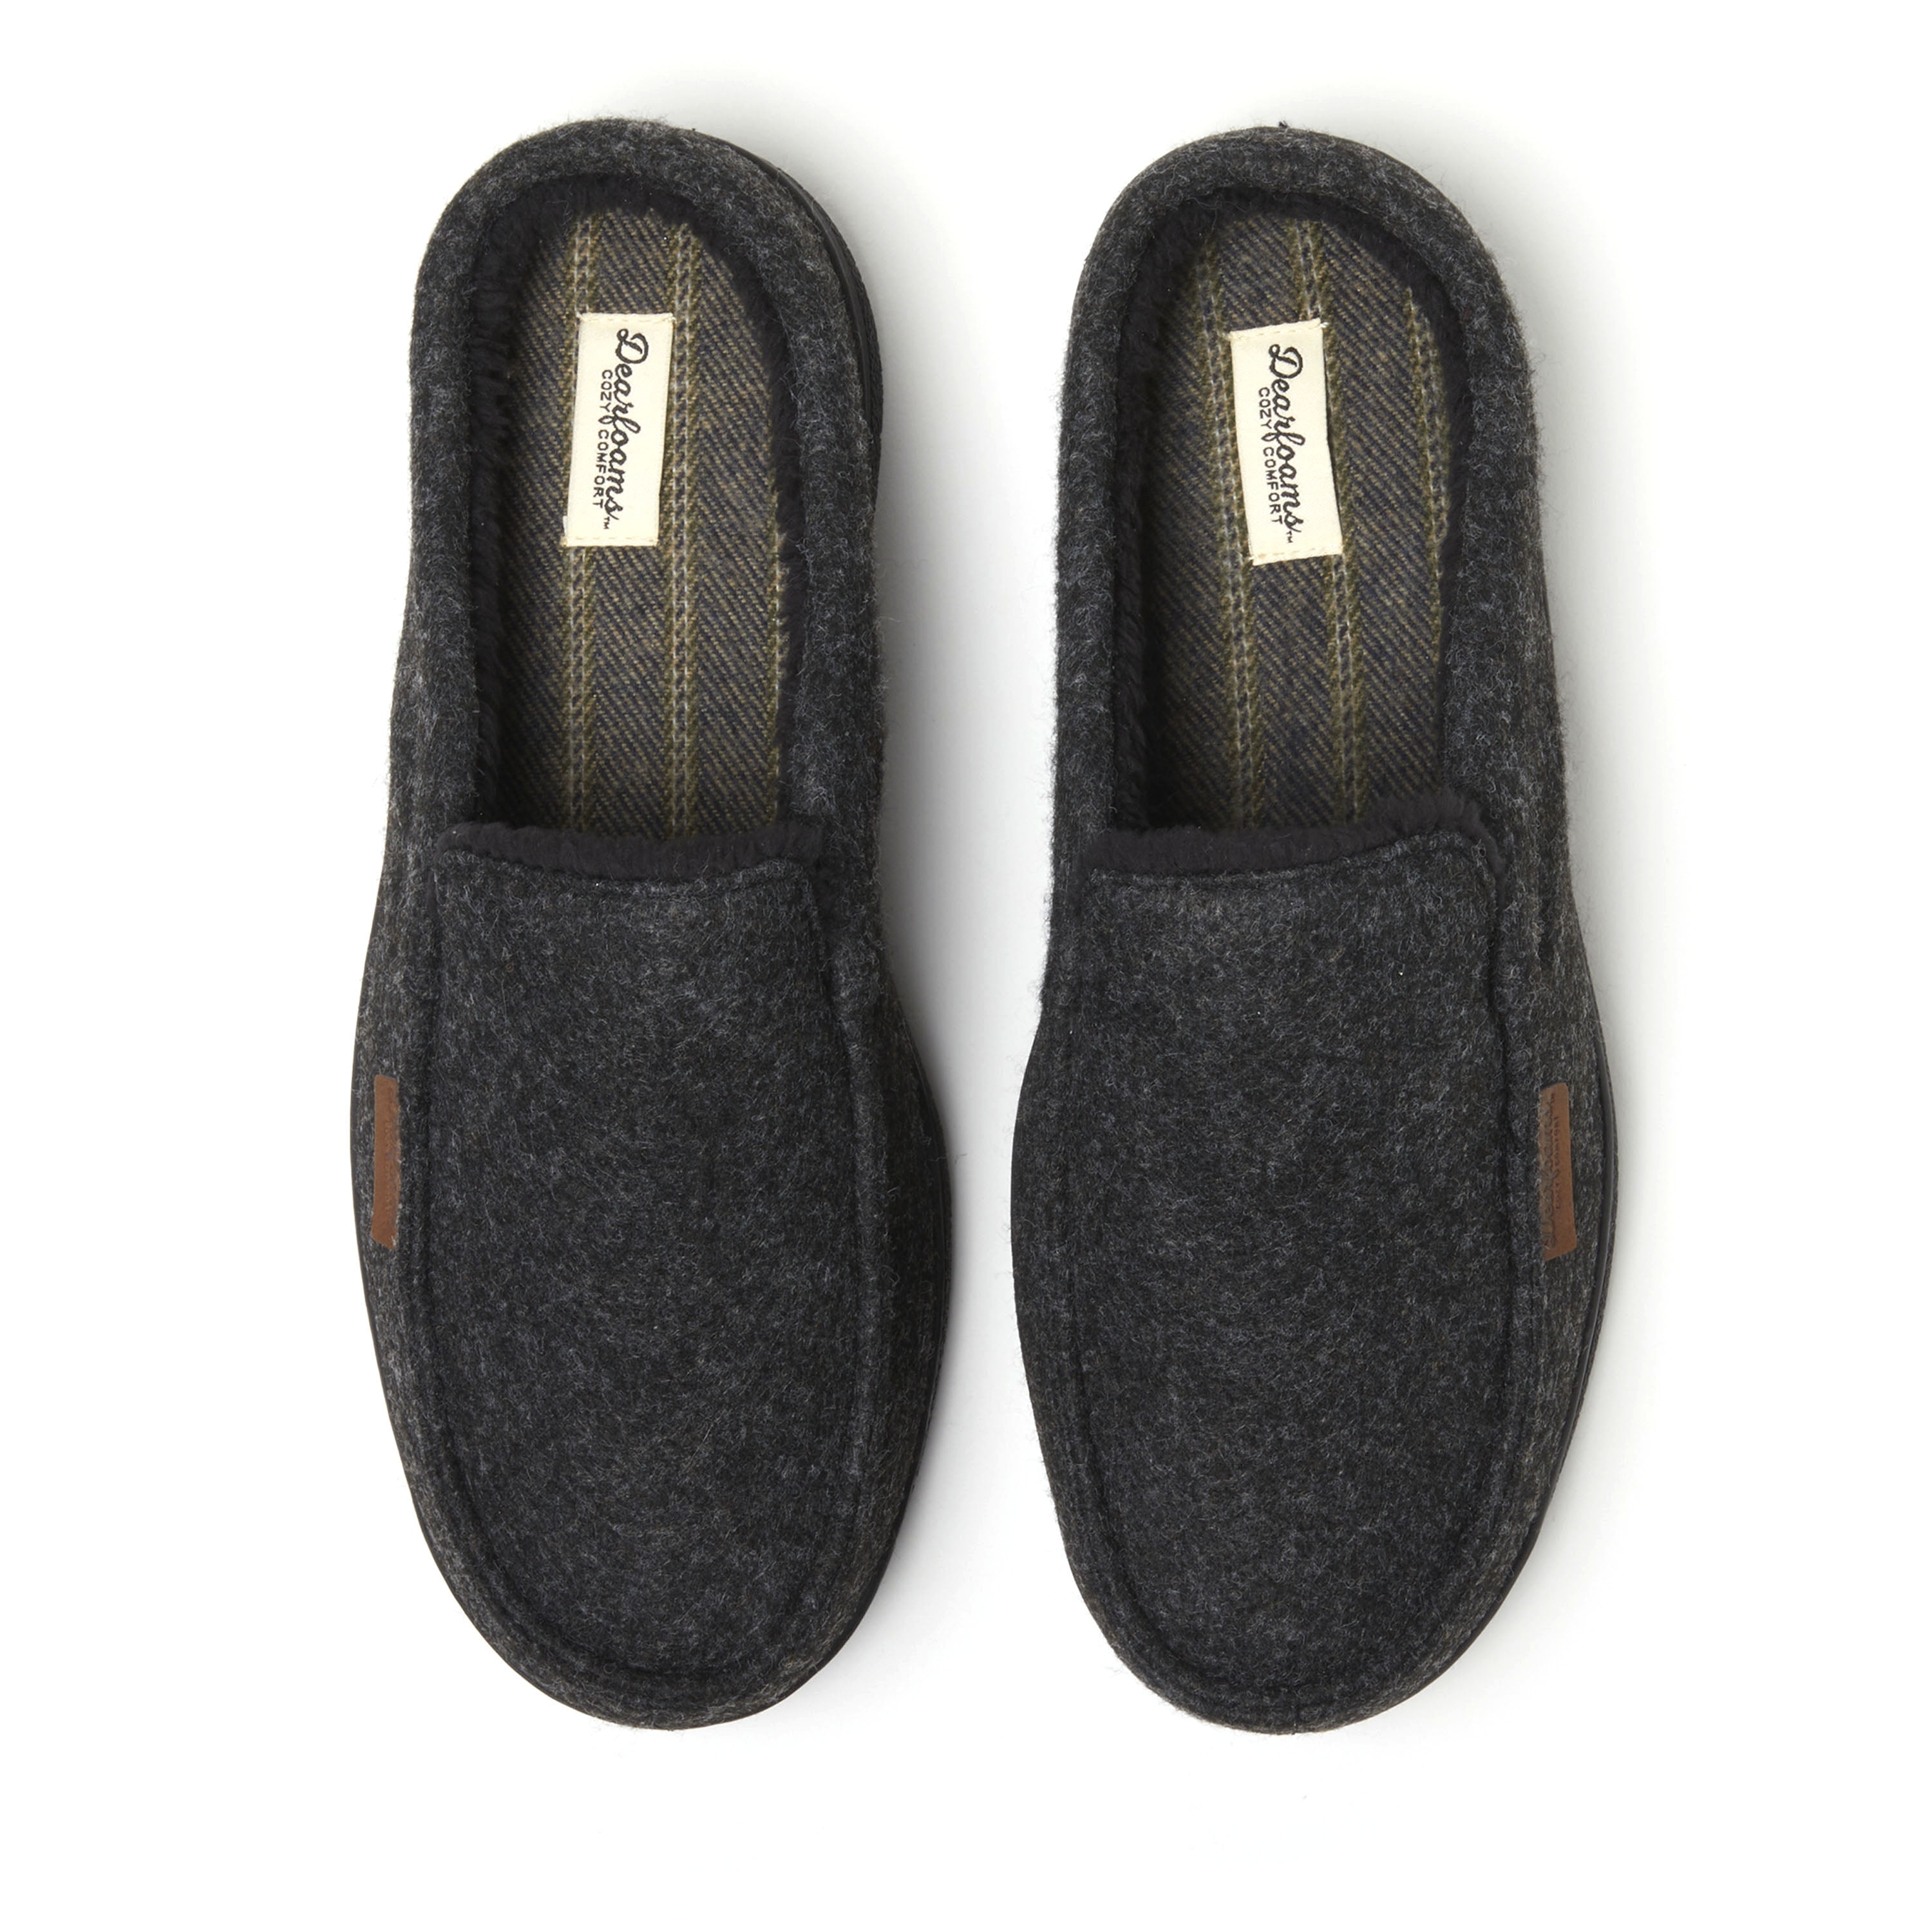 Dearfoams Cozy Comfort Men's Holiday Chill Out Slippers - Walmart.com